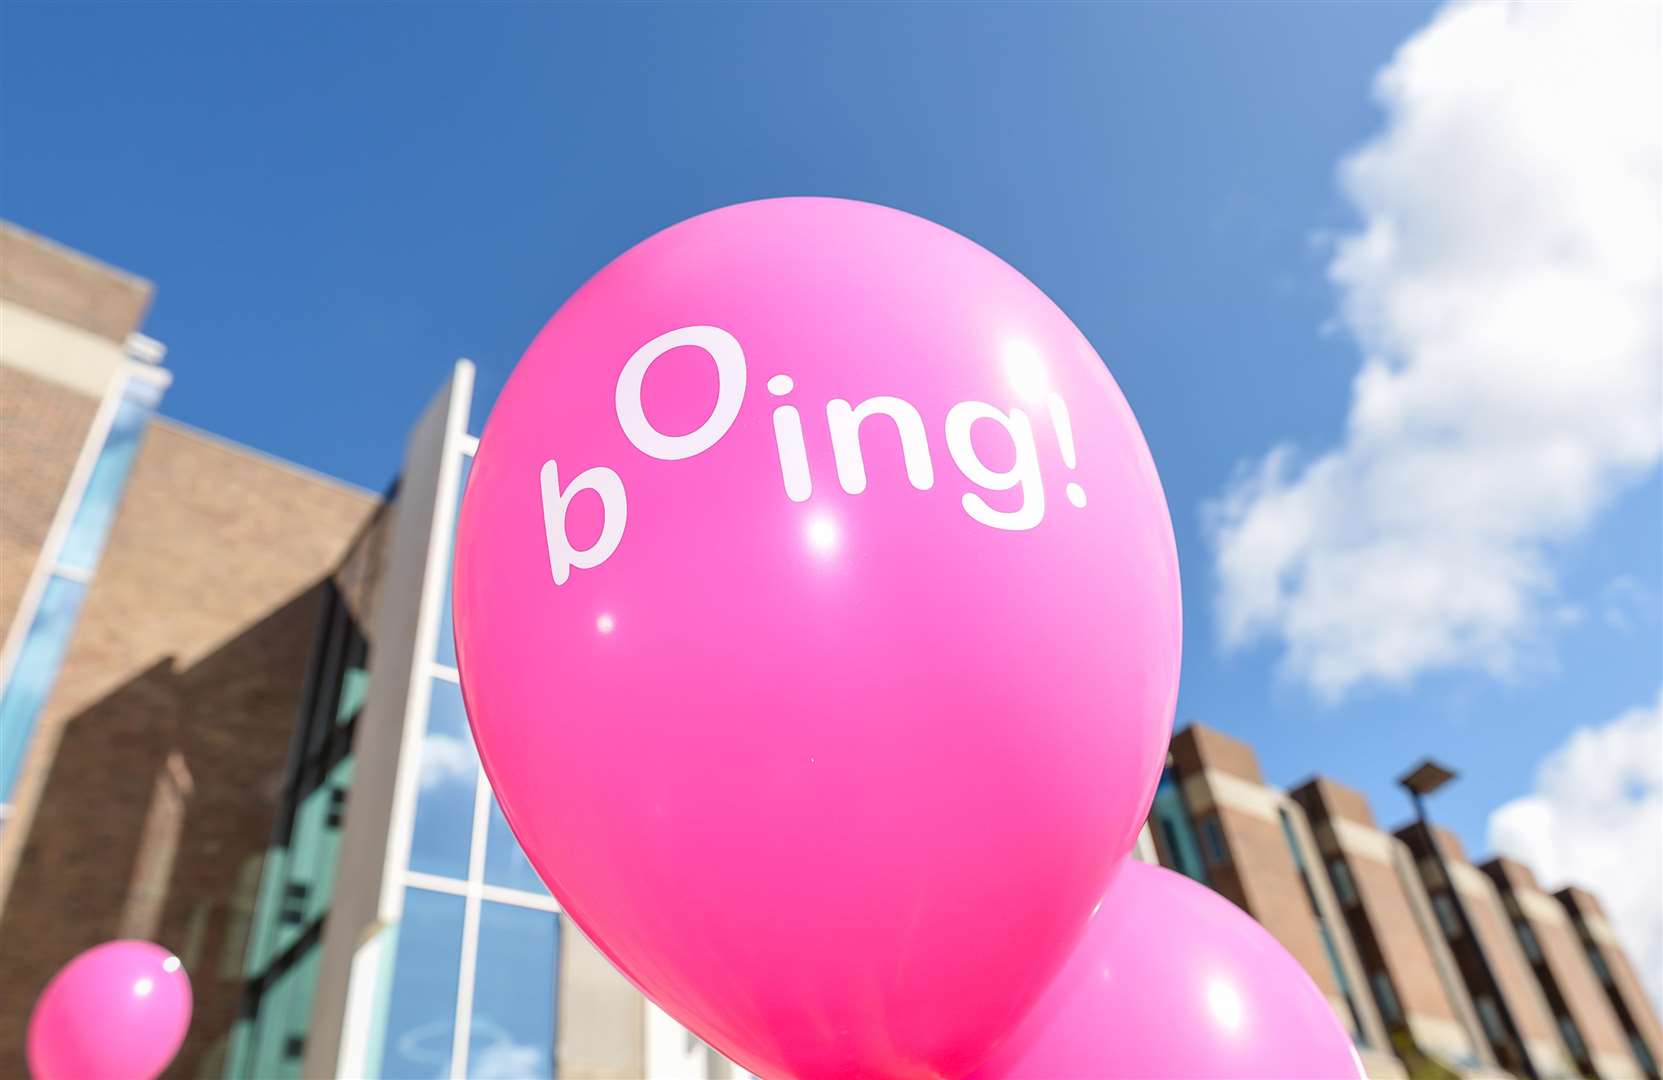 The launch of bOing! festival